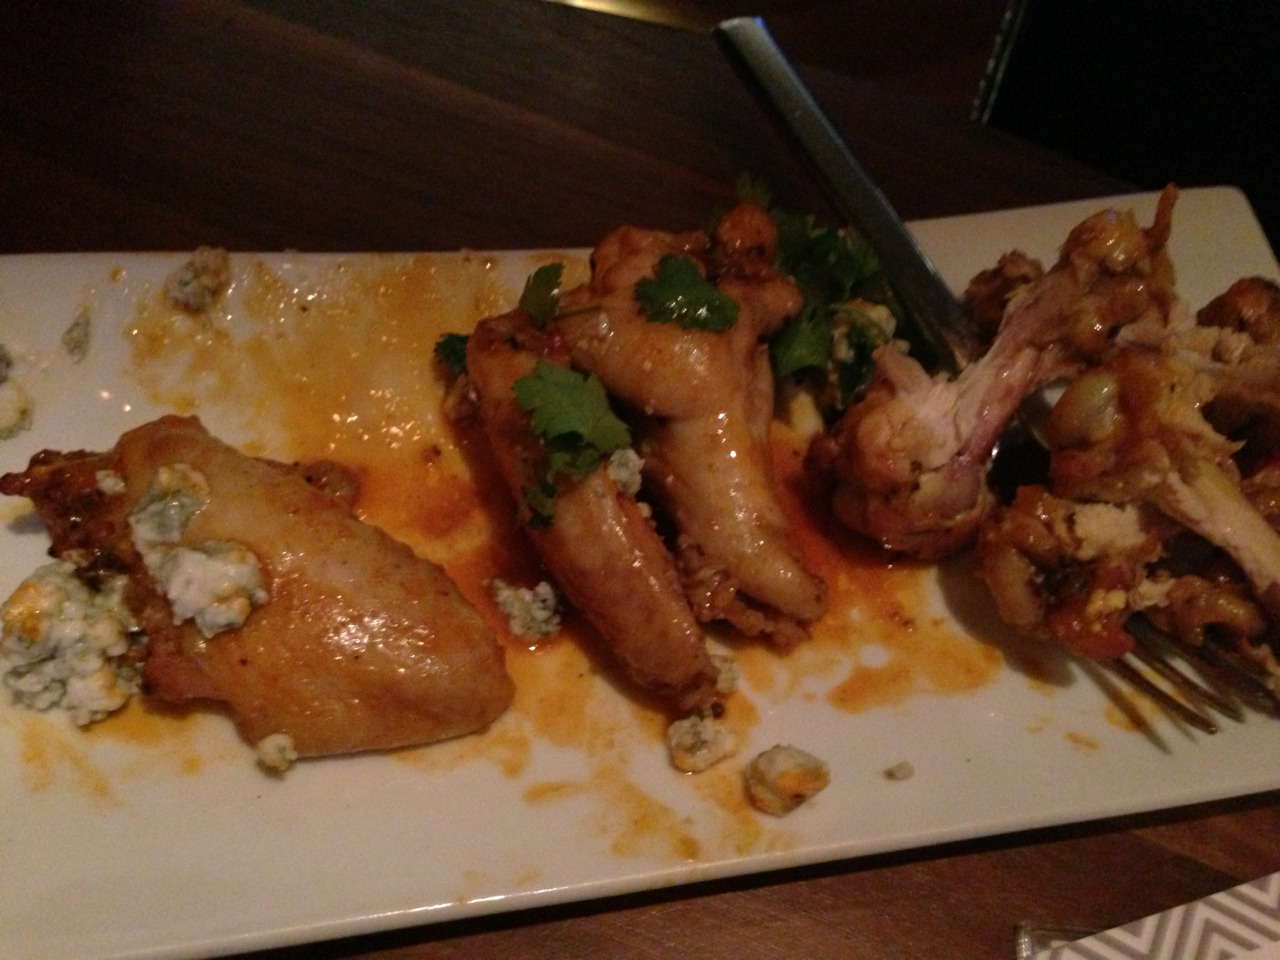 Wing review: Primebar Minneapolis Buffalo
An interesting presentation of blue cheese crumbles and wilted cilantro topping these wings led way a mushy bite that can only be described as cocktail weeny. Now, I like cocktail weenies, mind you, but it’s...